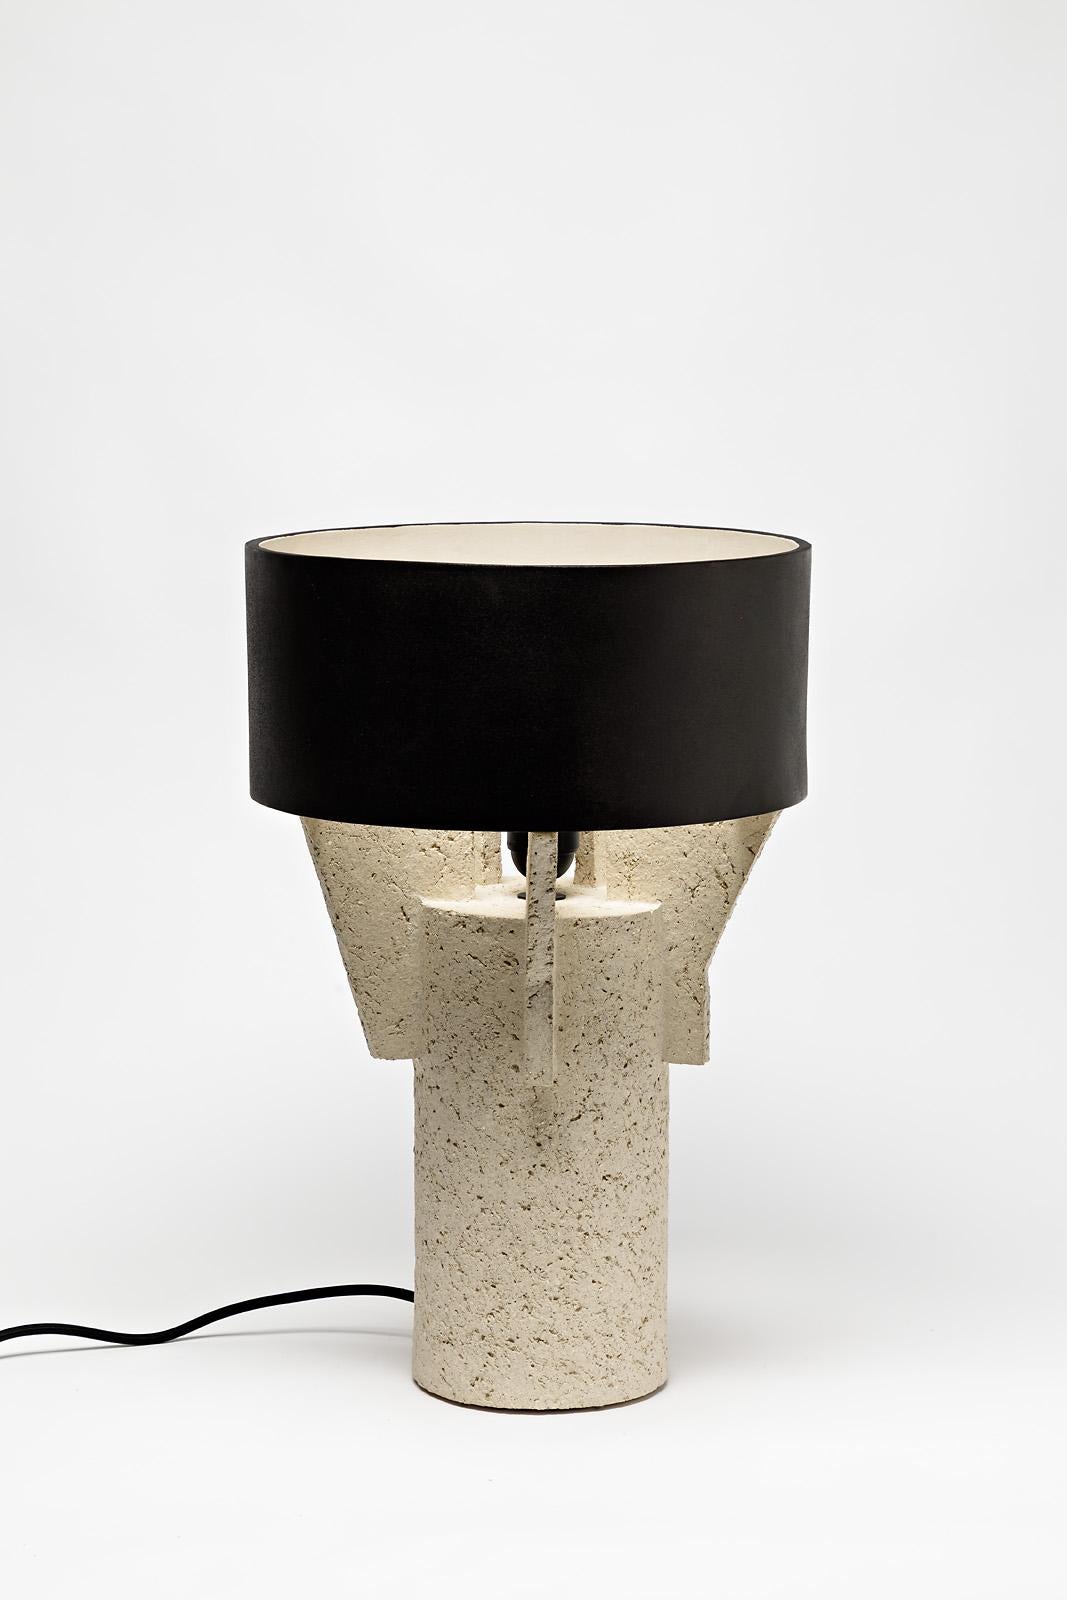 Beaux Arts Pair of Ceramic Table Lamps by Denis Castaing with Brown Glaze, 2019 For Sale